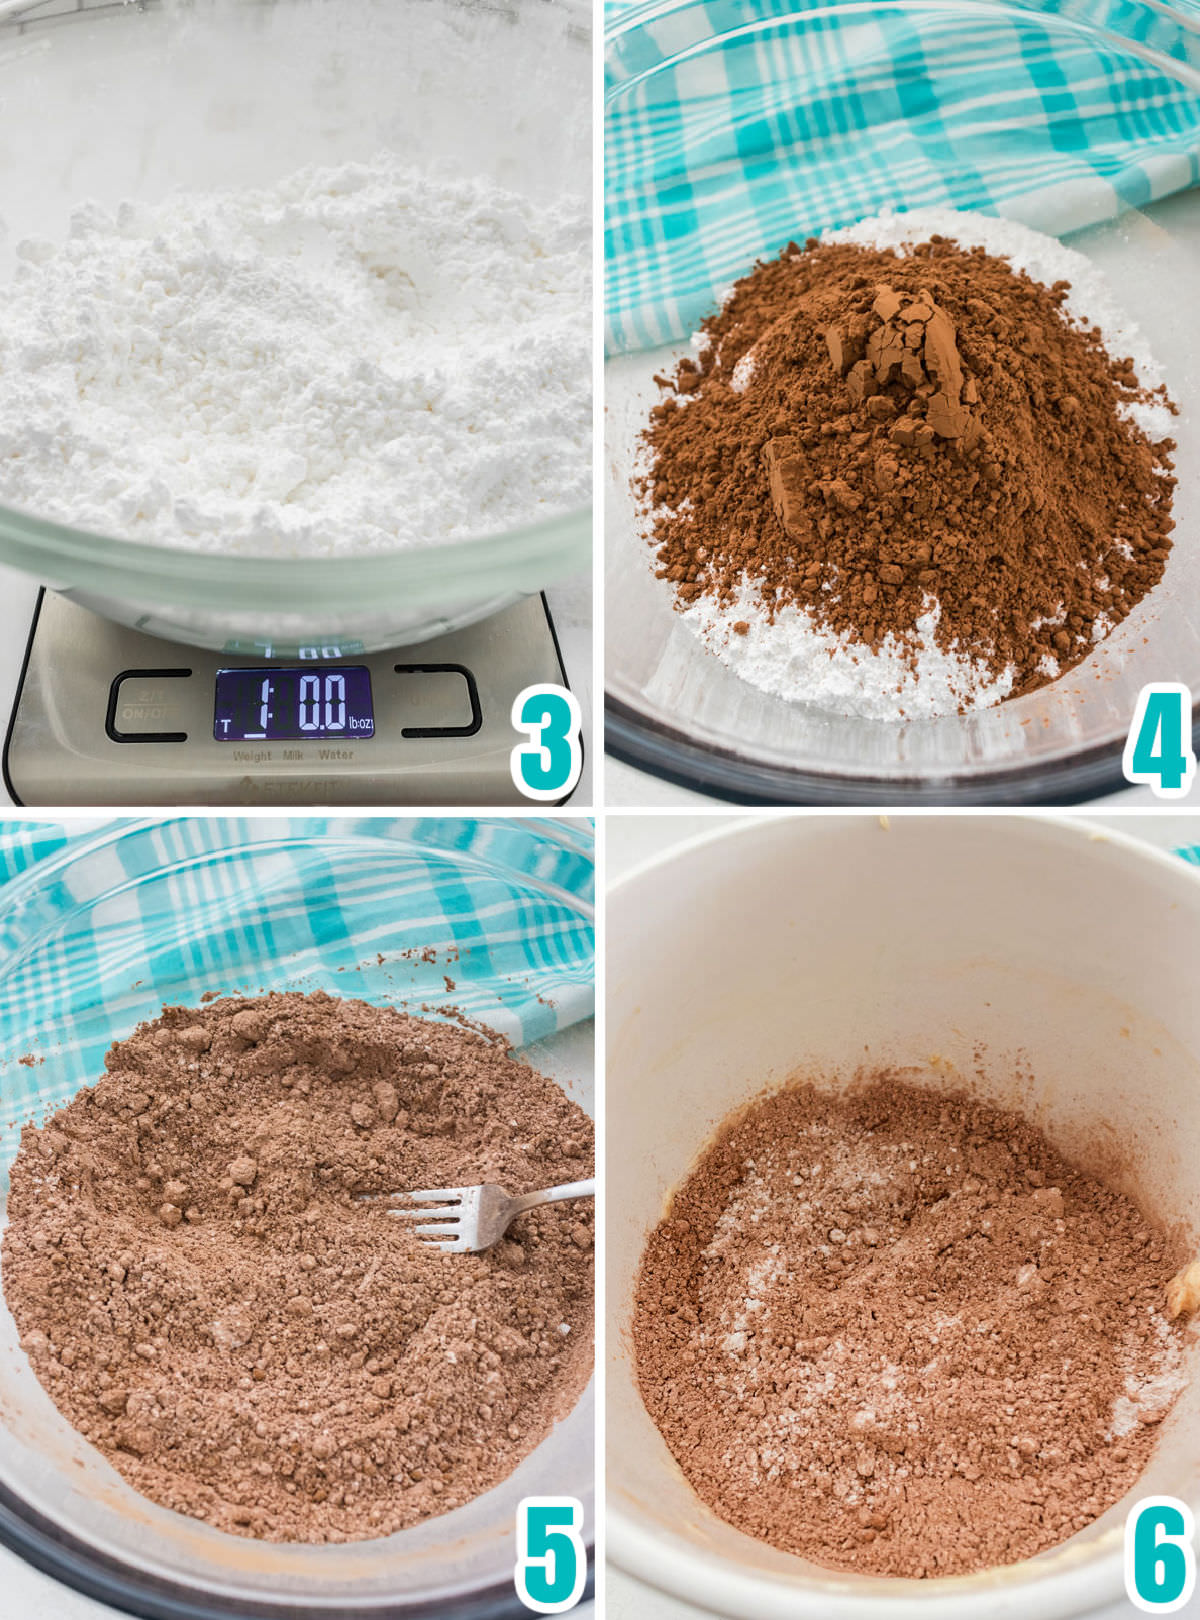 Collage image showing the steps for combining the Powdered Sugar with the Cocoa Powder.